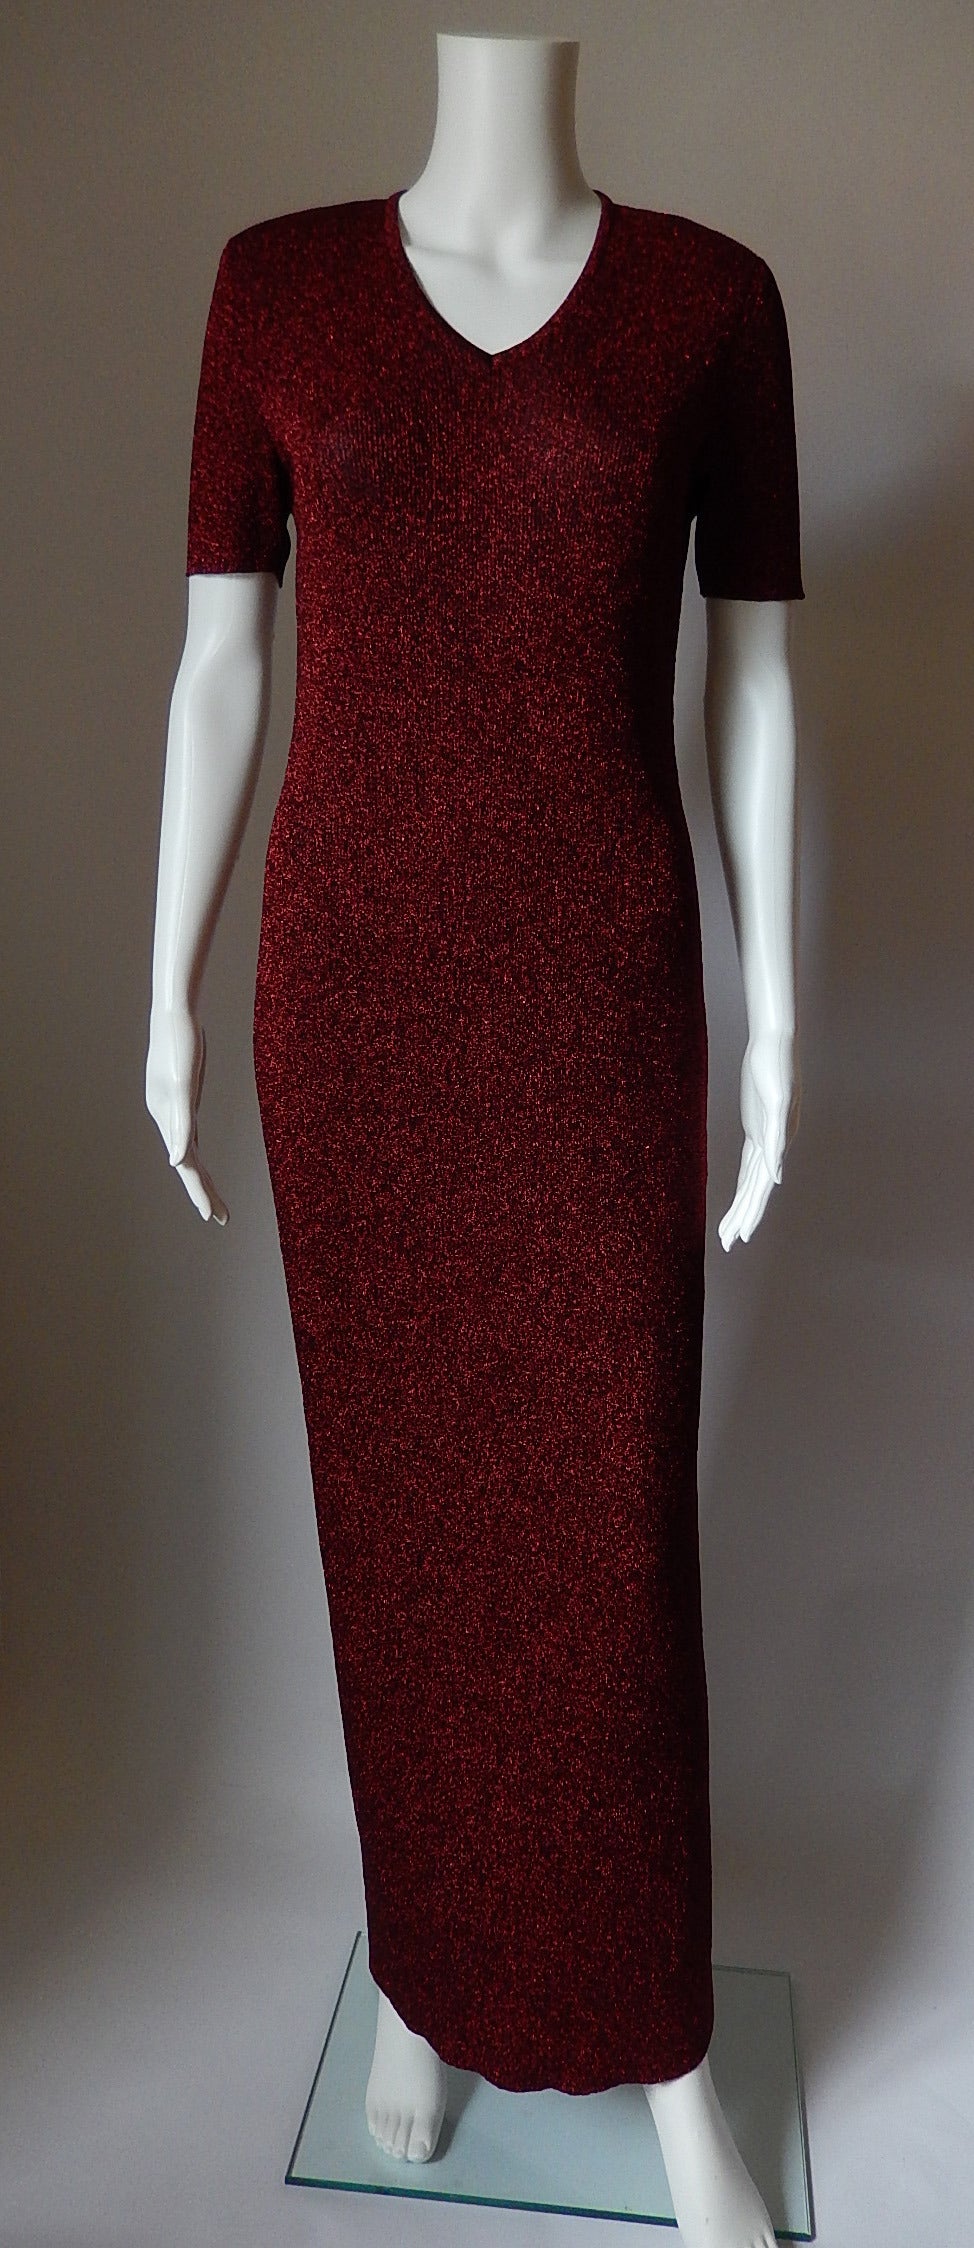 Chanel red metallic v-neck short sleeeve Maxi Dress
No year or material label inside but feels like a stretchy rayon blend
All measurements are taken flat
Bust:  35